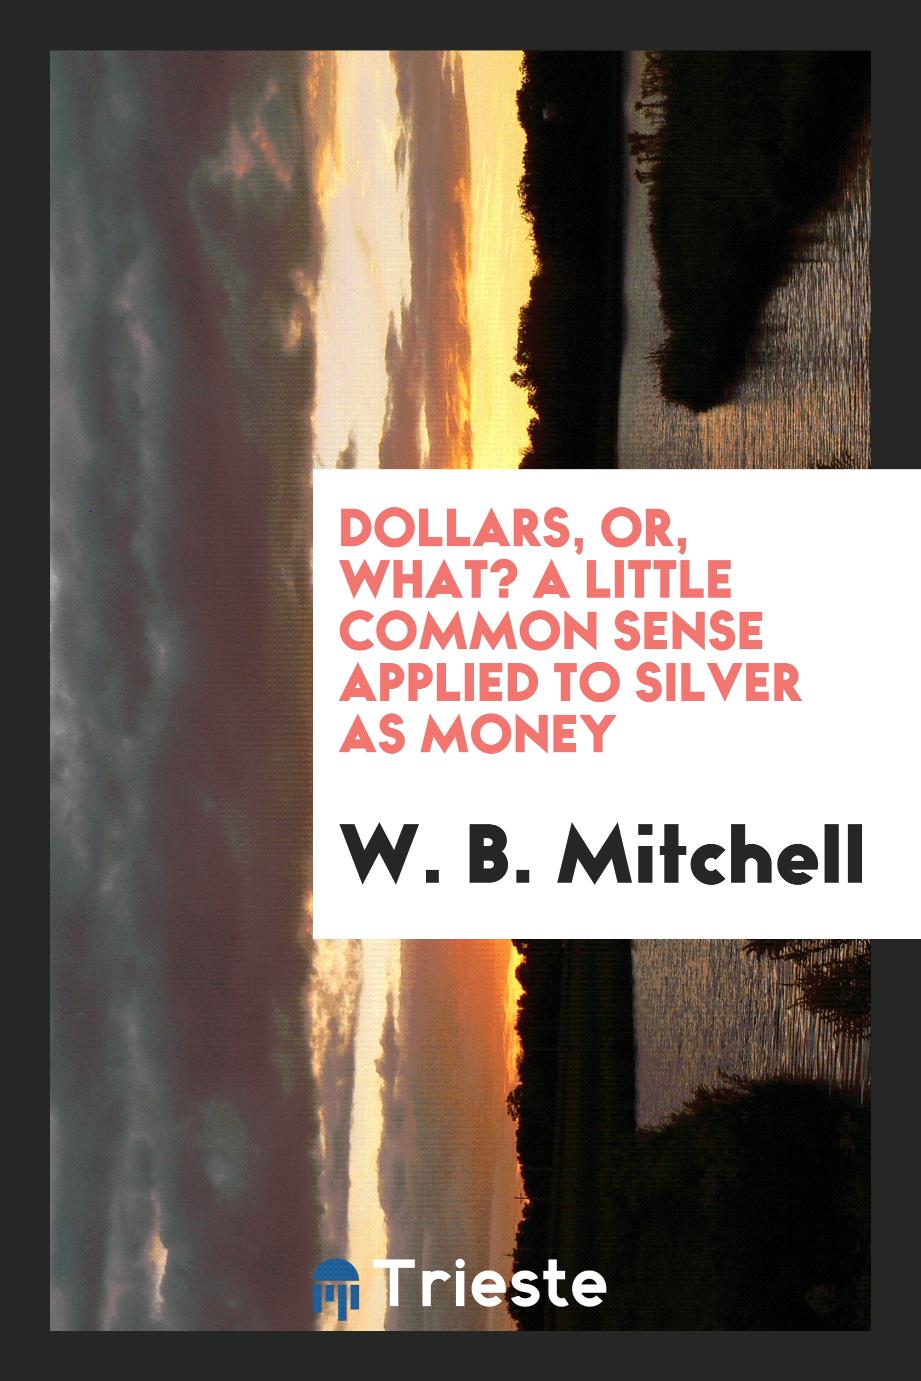 Dollars, or, What? A Little Common Sense Applied to Silver as Money